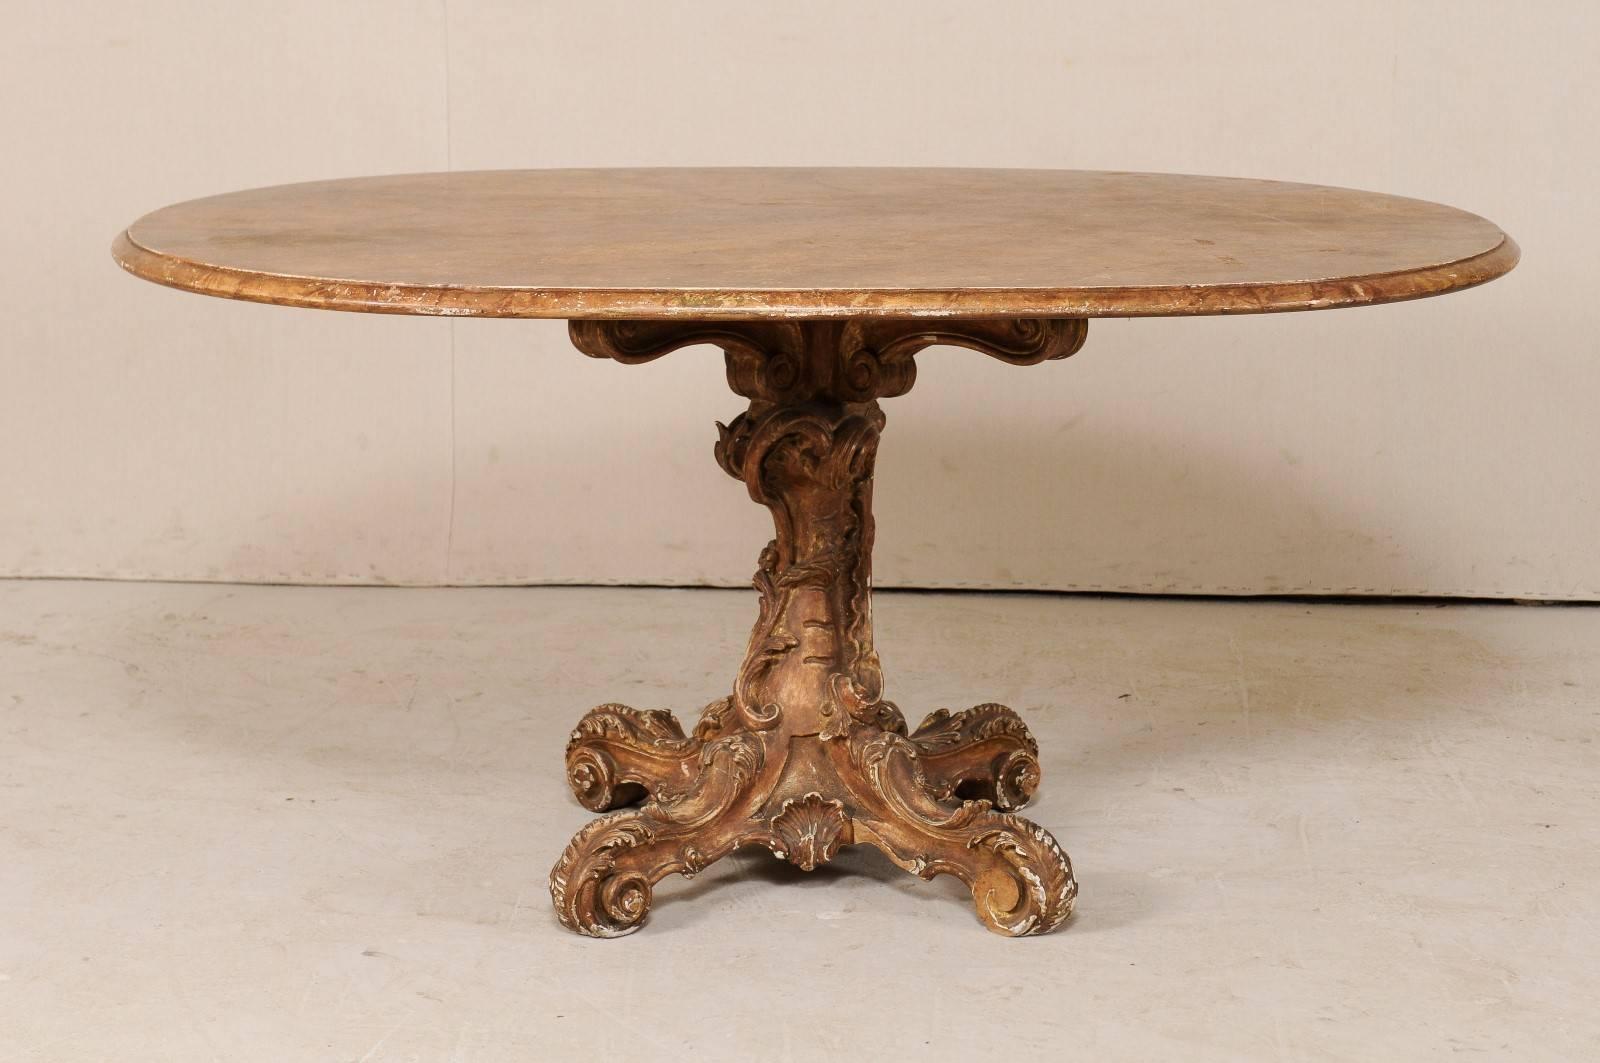 An Italian 19th century oval pedestal table with ornately carved wood base. This antique table from Italy features an oval-shaped top with a faux marble finish, resting atop a curvy and naturalistic style pedestal base carved with acanthus leaves